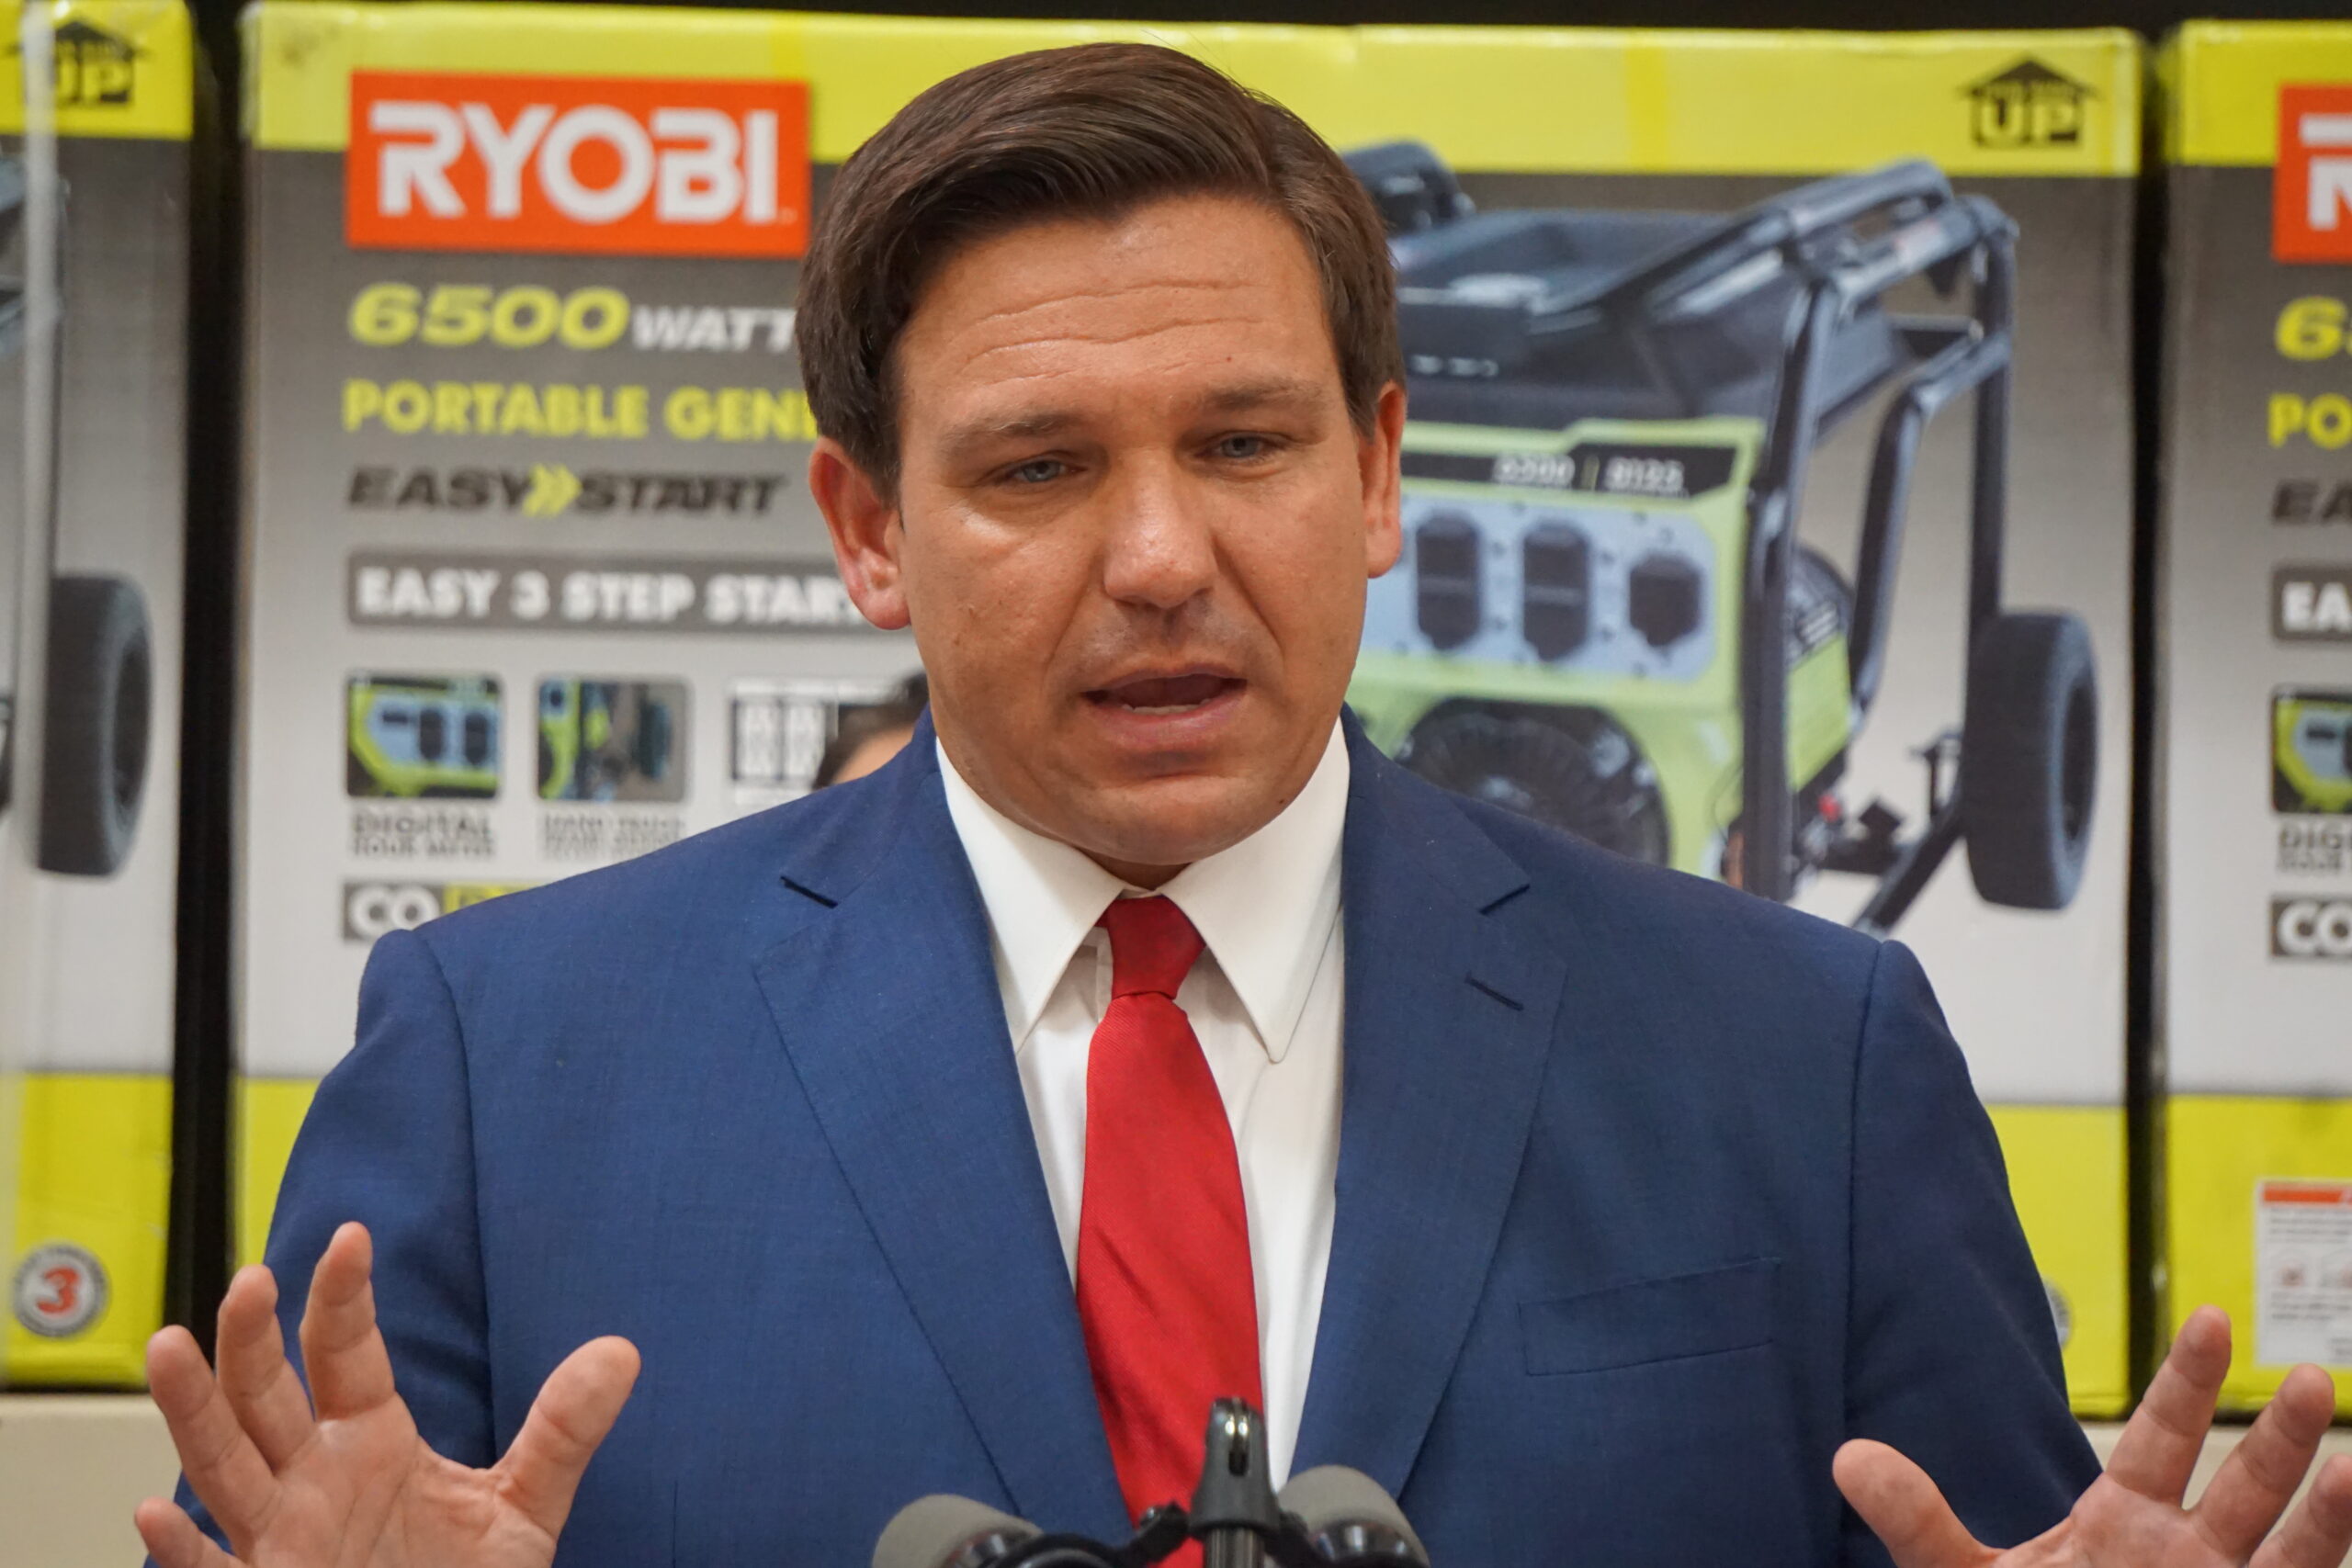 Federal Government Delayed Vaccines, But DeSantis' Vaccination Effort Called 'Criminal' by Fried, Farmer